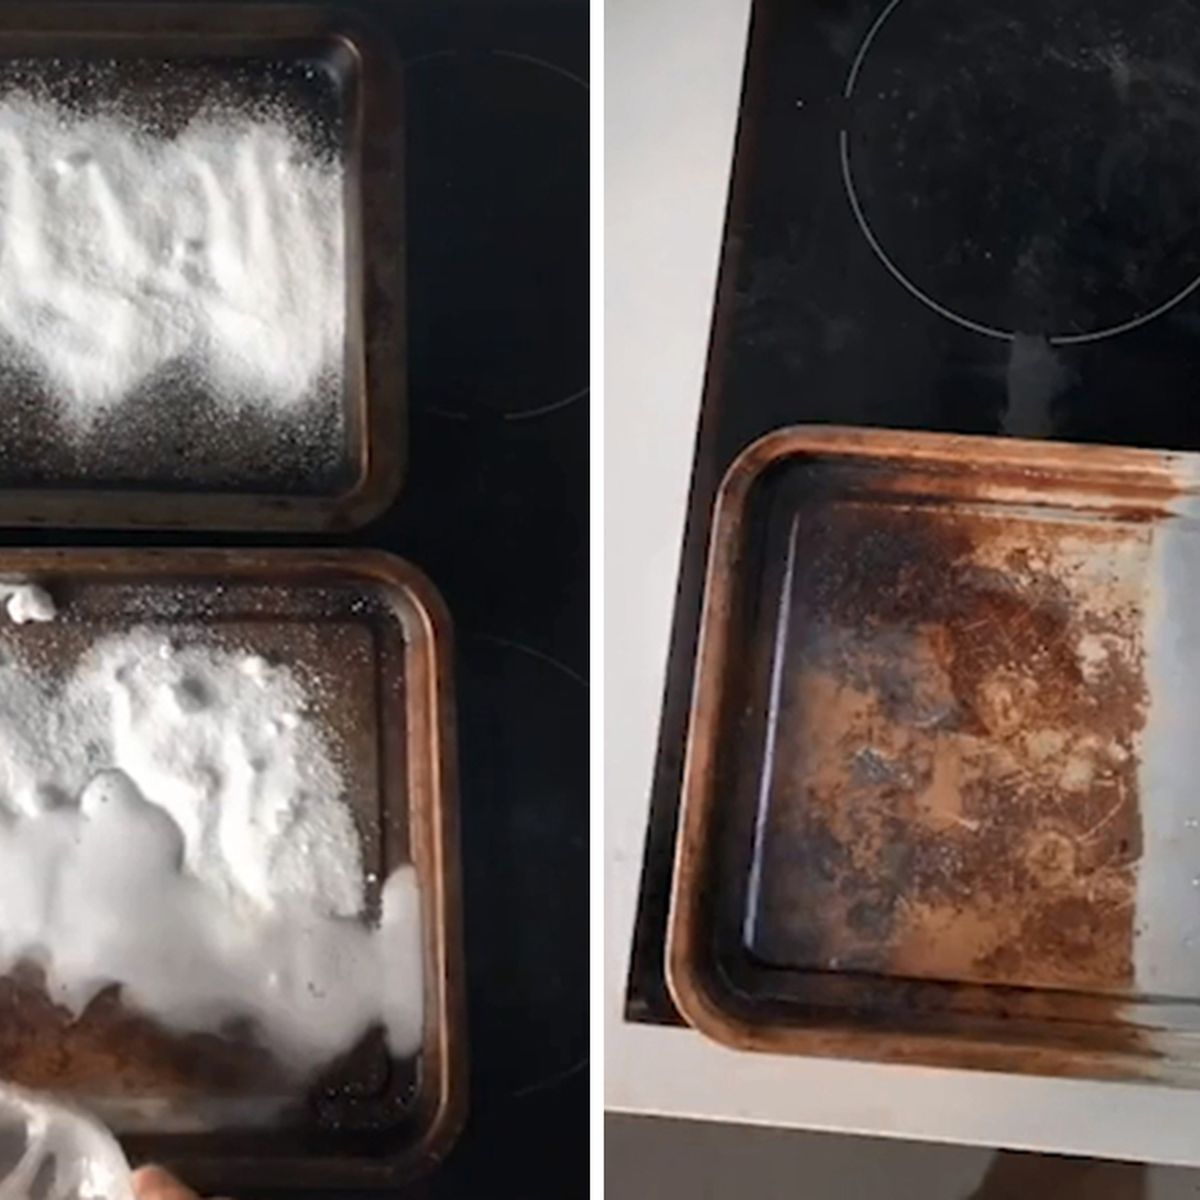 I'm a chef and you've been cleaning your baking trays all wrong - get more  of the gross burnt gunk off using my method